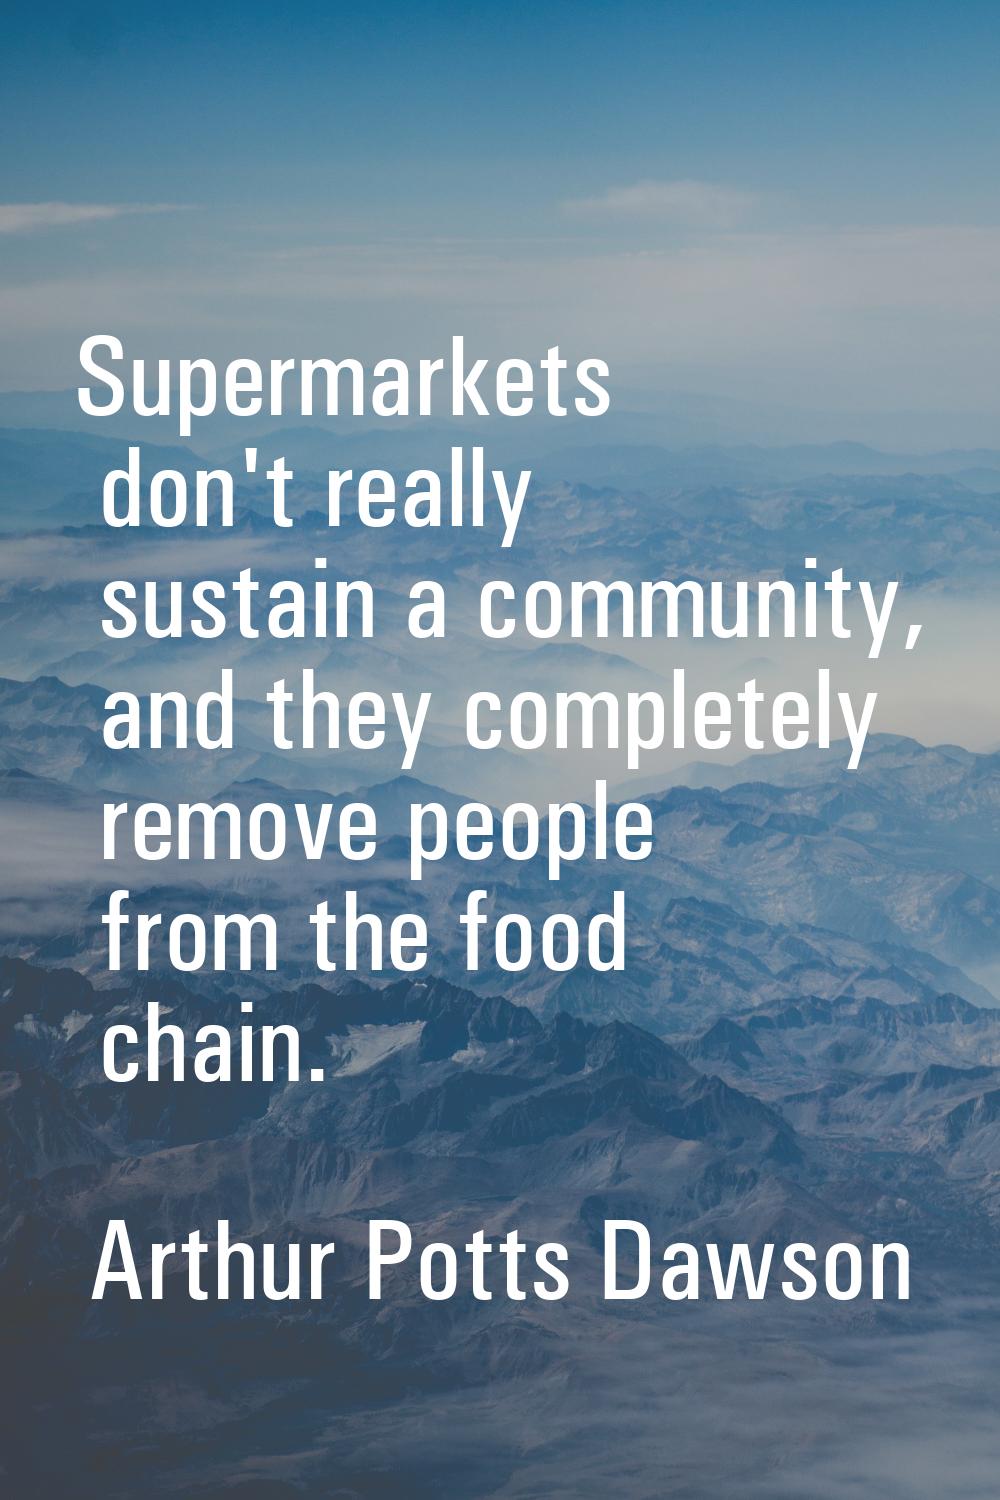 Supermarkets don't really sustain a community, and they completely remove people from the food chai